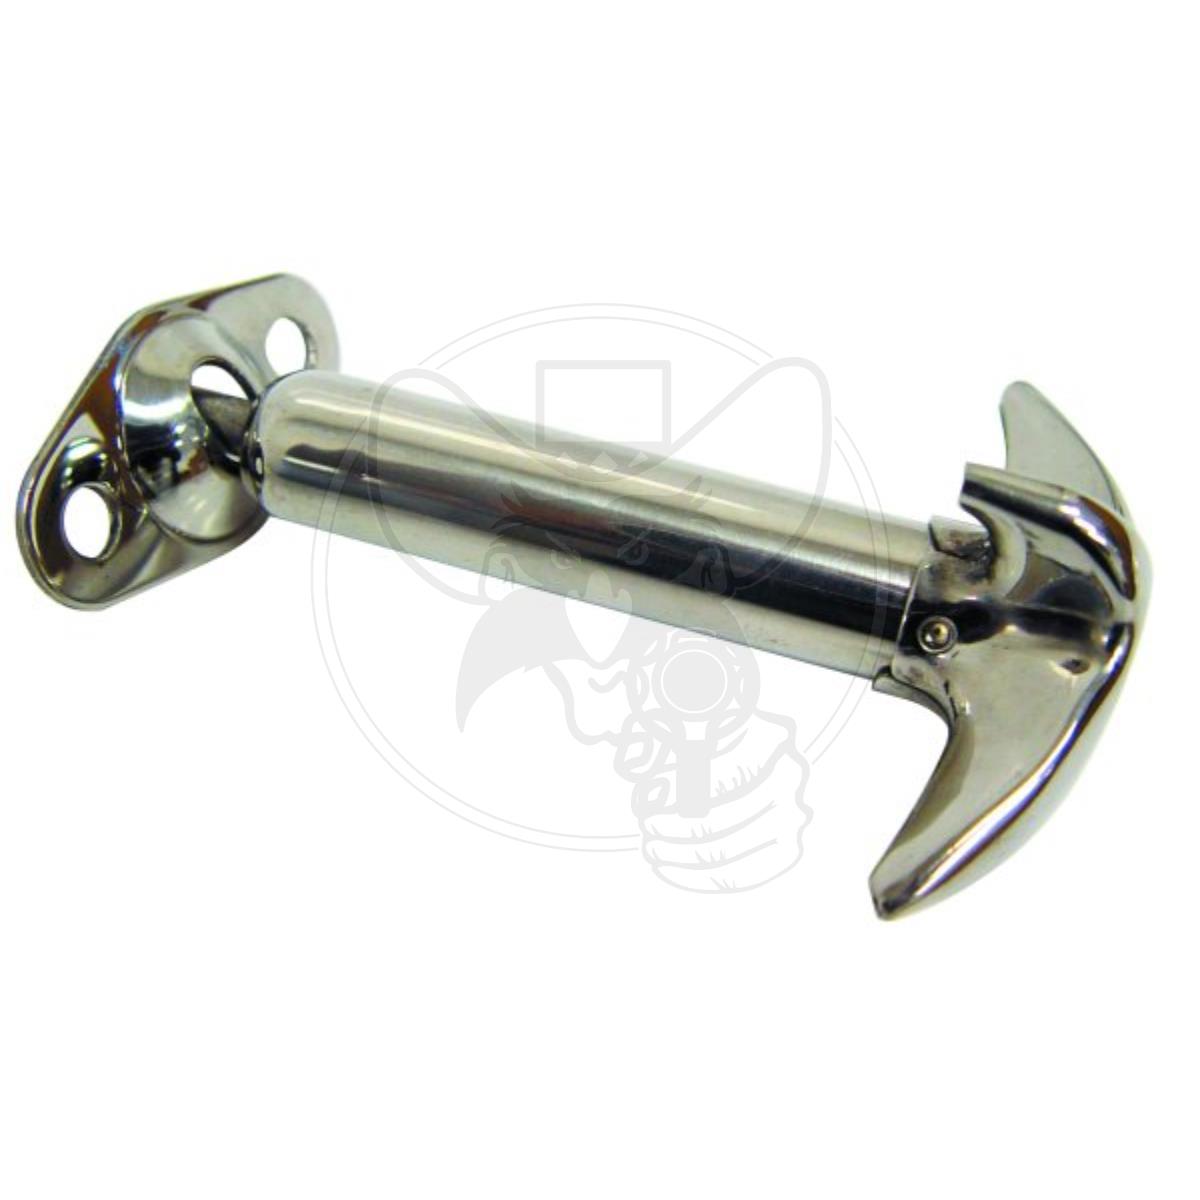 VINTIQUE POLISHED STAINLESS STEEL BONNET LATCH